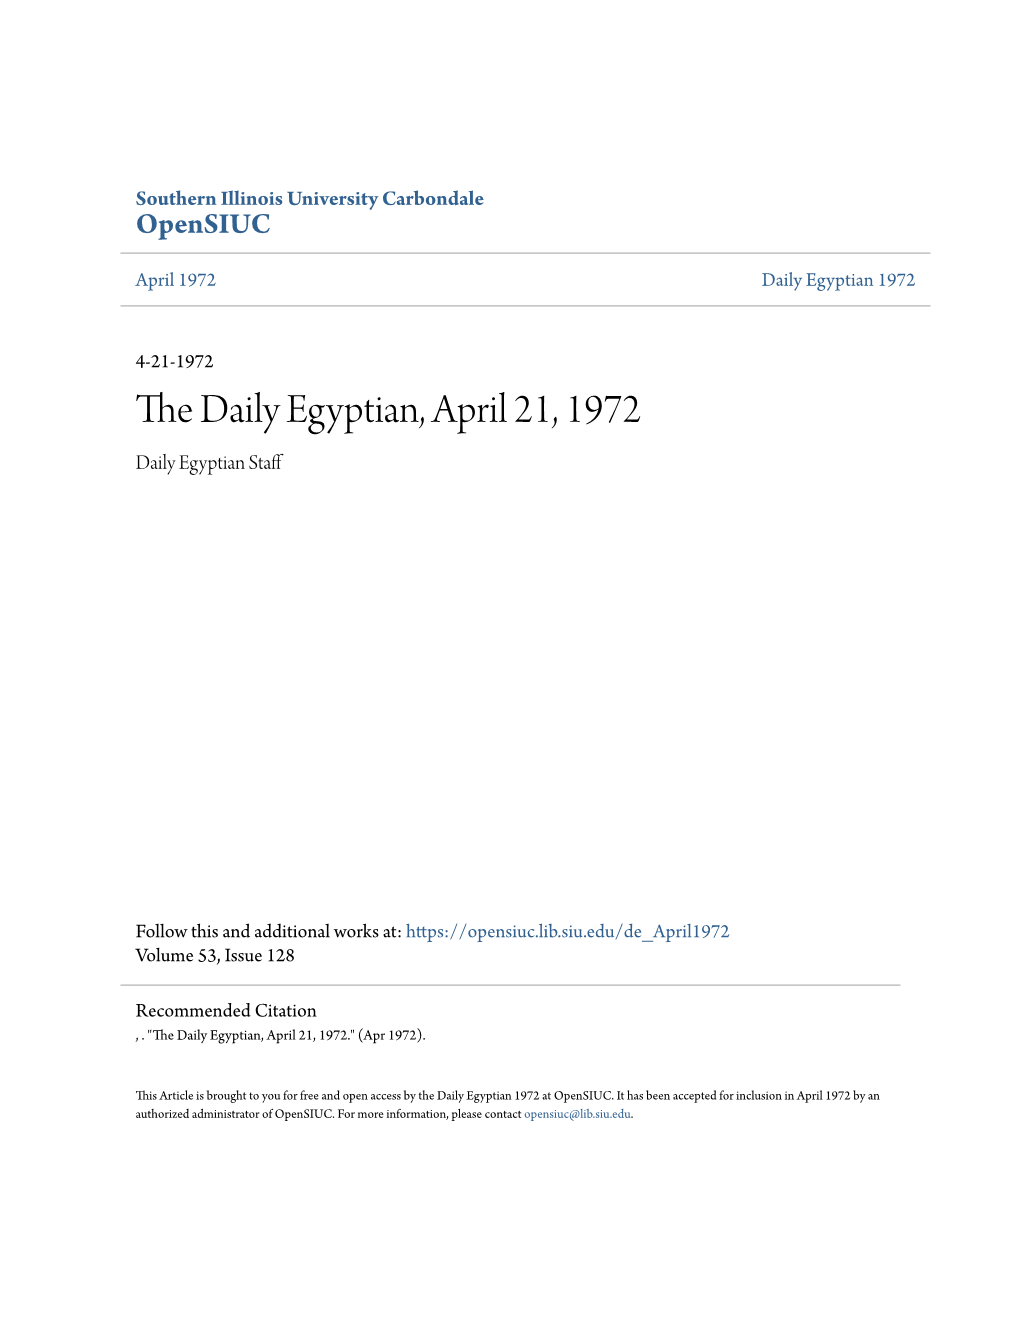 The Daily Egyptian, April 21, 1972